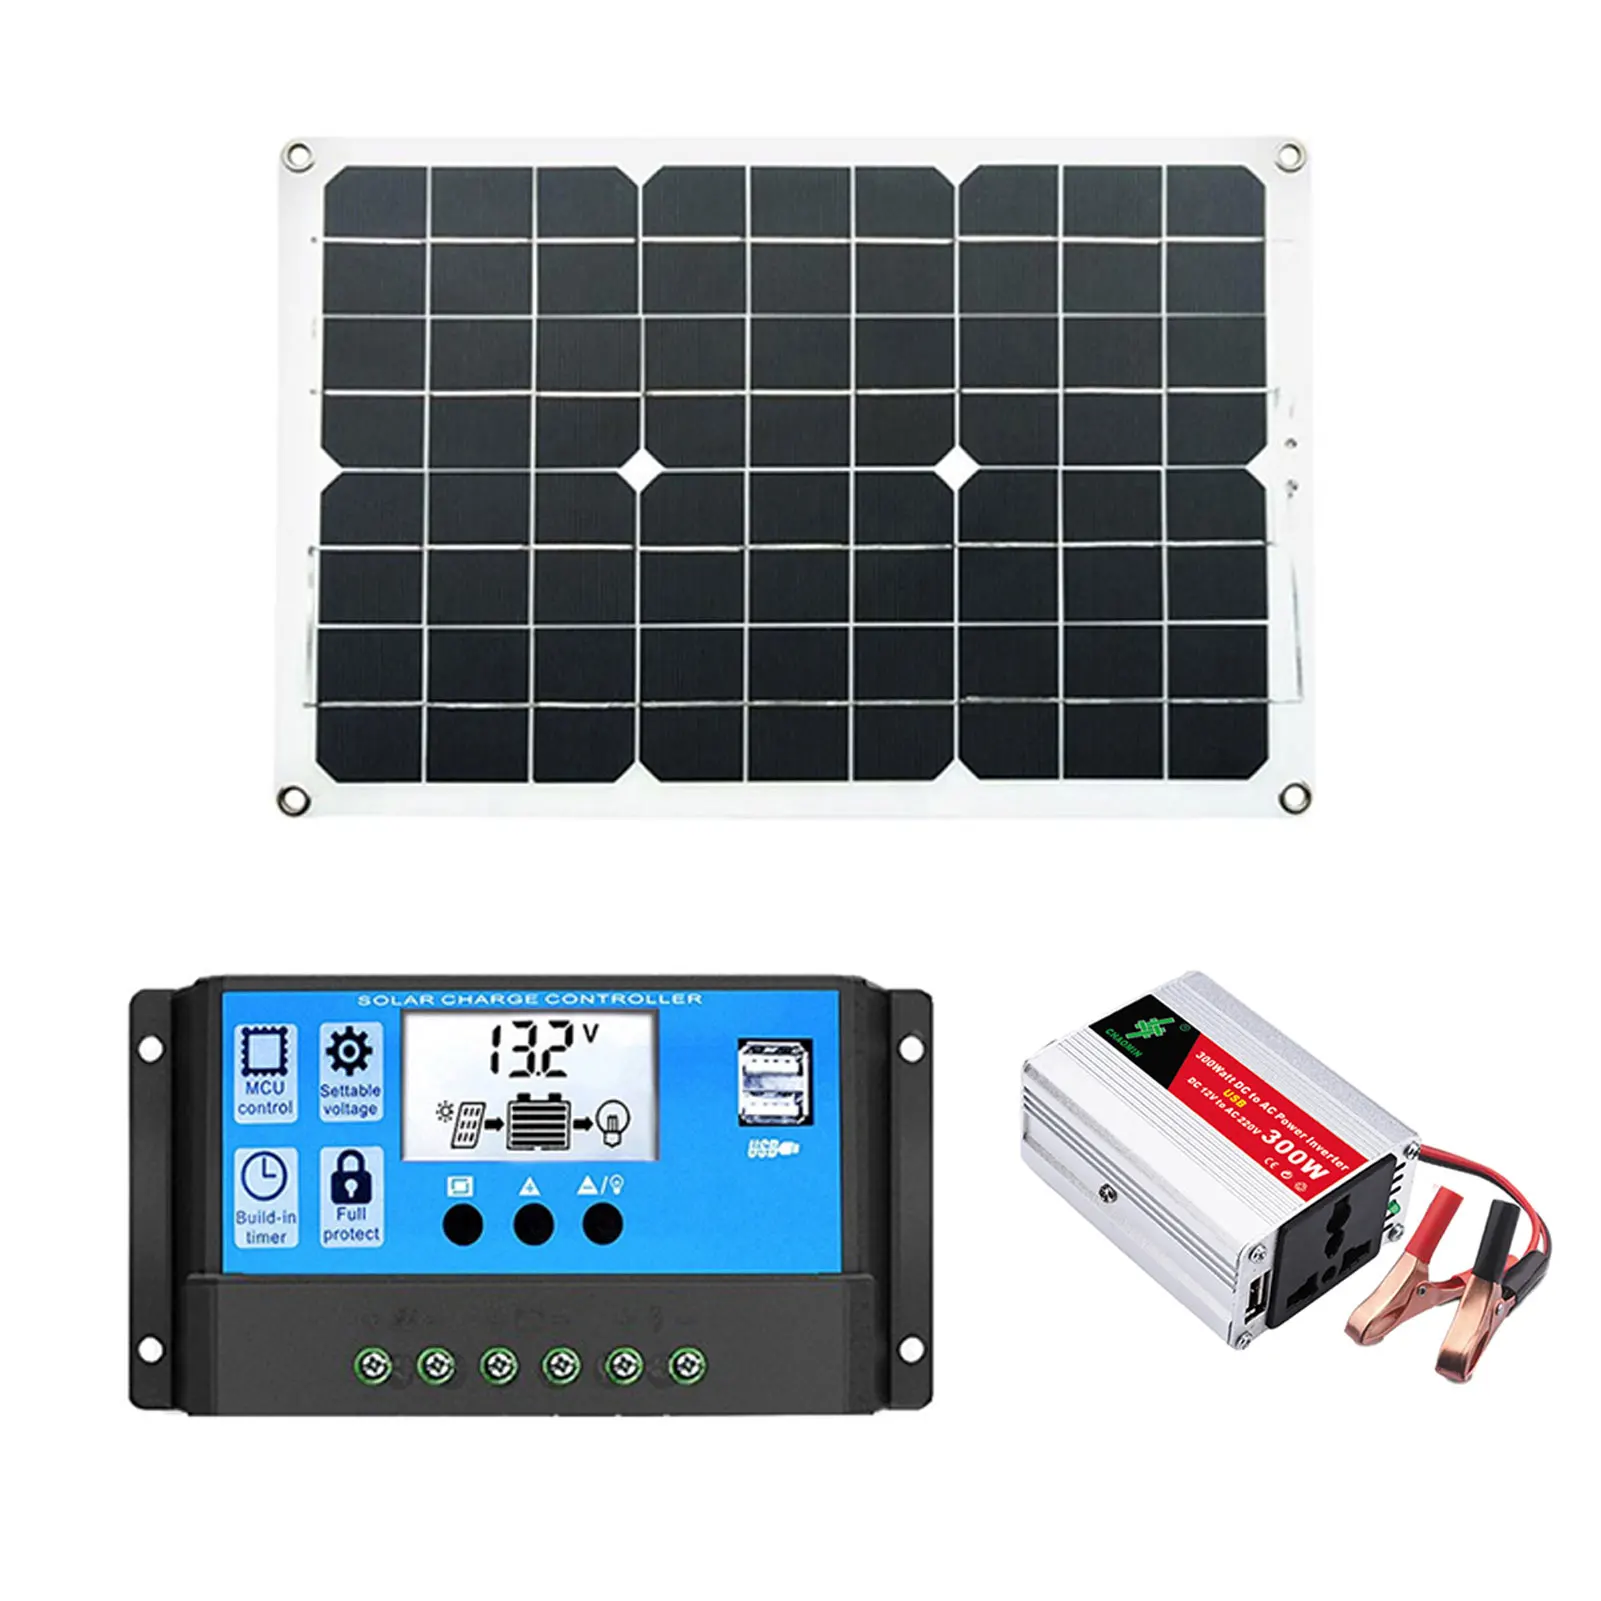 

Solar Power System Solar Generator 300W With 220V AC Outlets 30A Solar Charge Controller Pure Sine Wave Inverter Charger RV